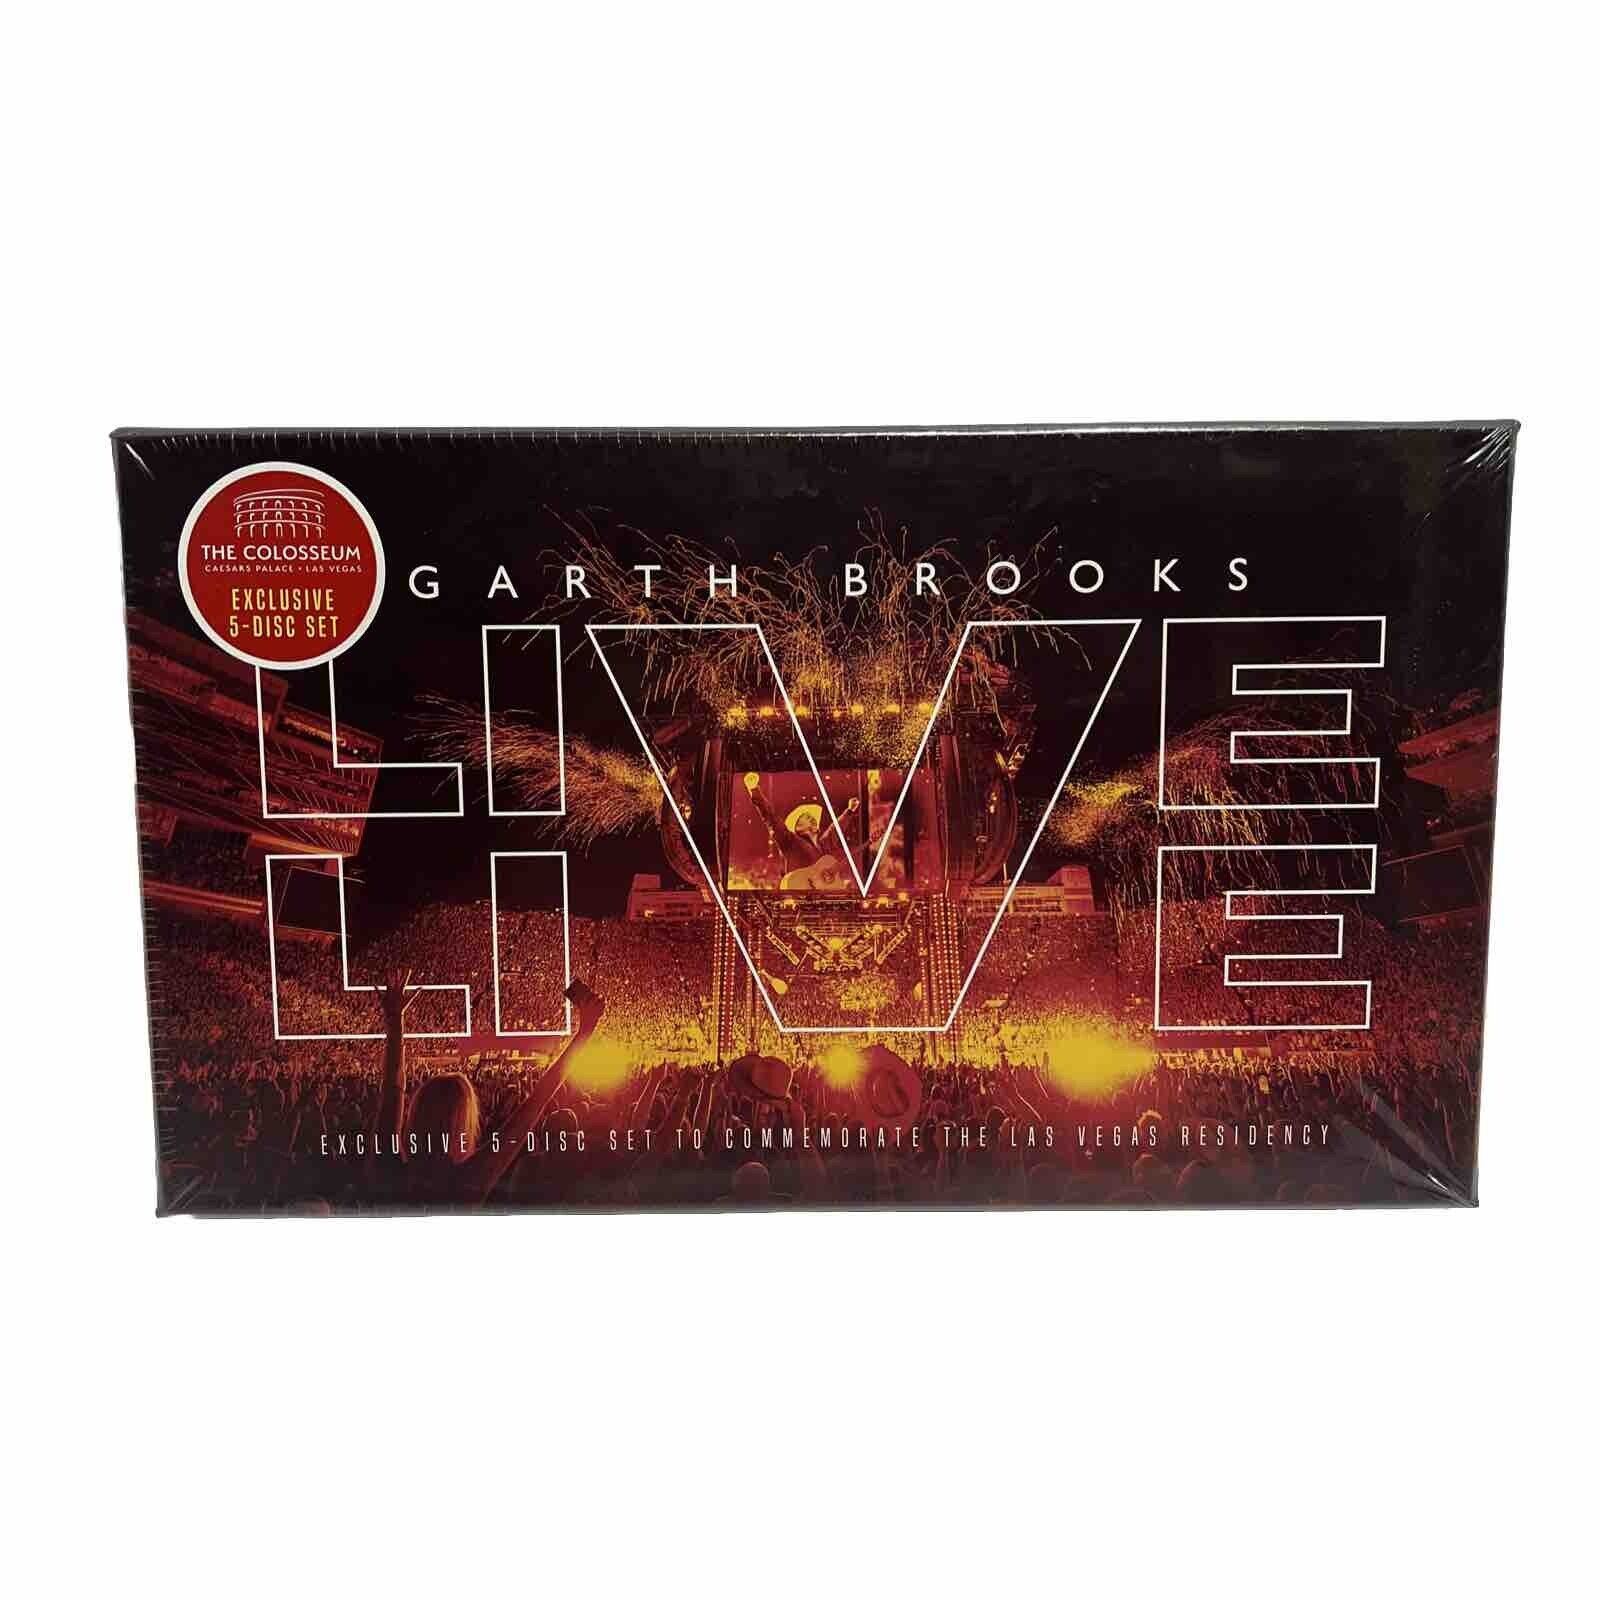 Garth Brooks: Live 5-Disc Set to Commemorate the Las Vegas Residency *NEW*